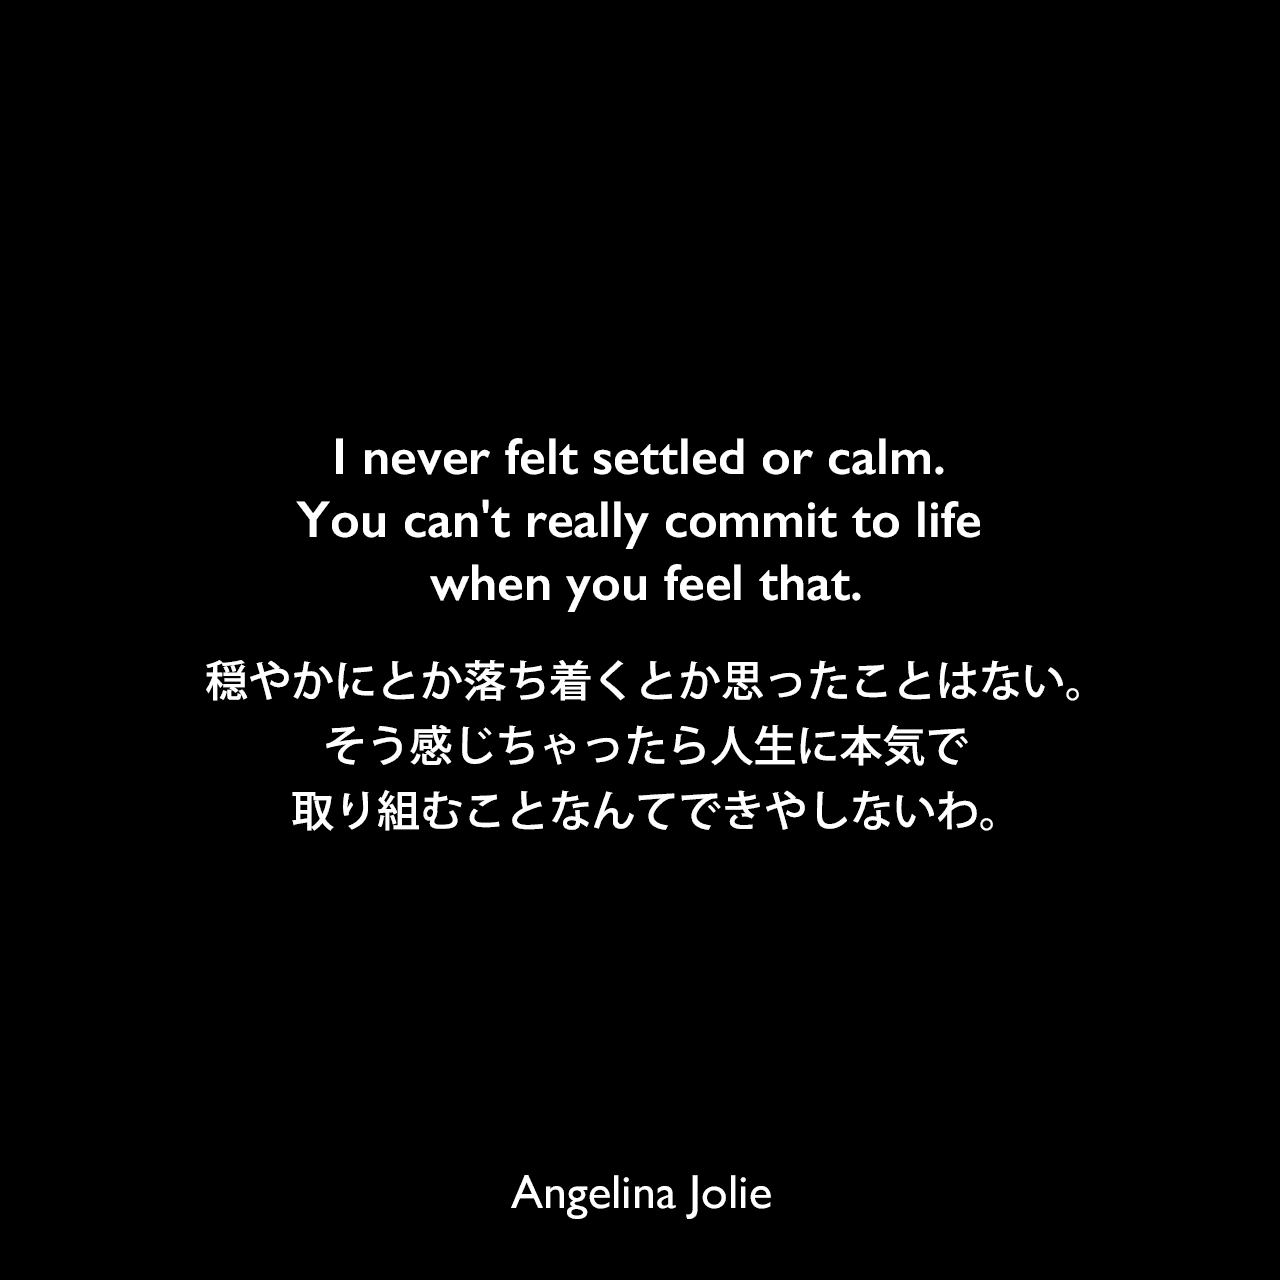 I never felt settled or calm. You can't really commit to life when you feel that.穏やかにとか落ち着くとか思ったことはない。そう感じちゃったら人生に本気で取り組むことなんてできやしないわ。Angelina Jolie